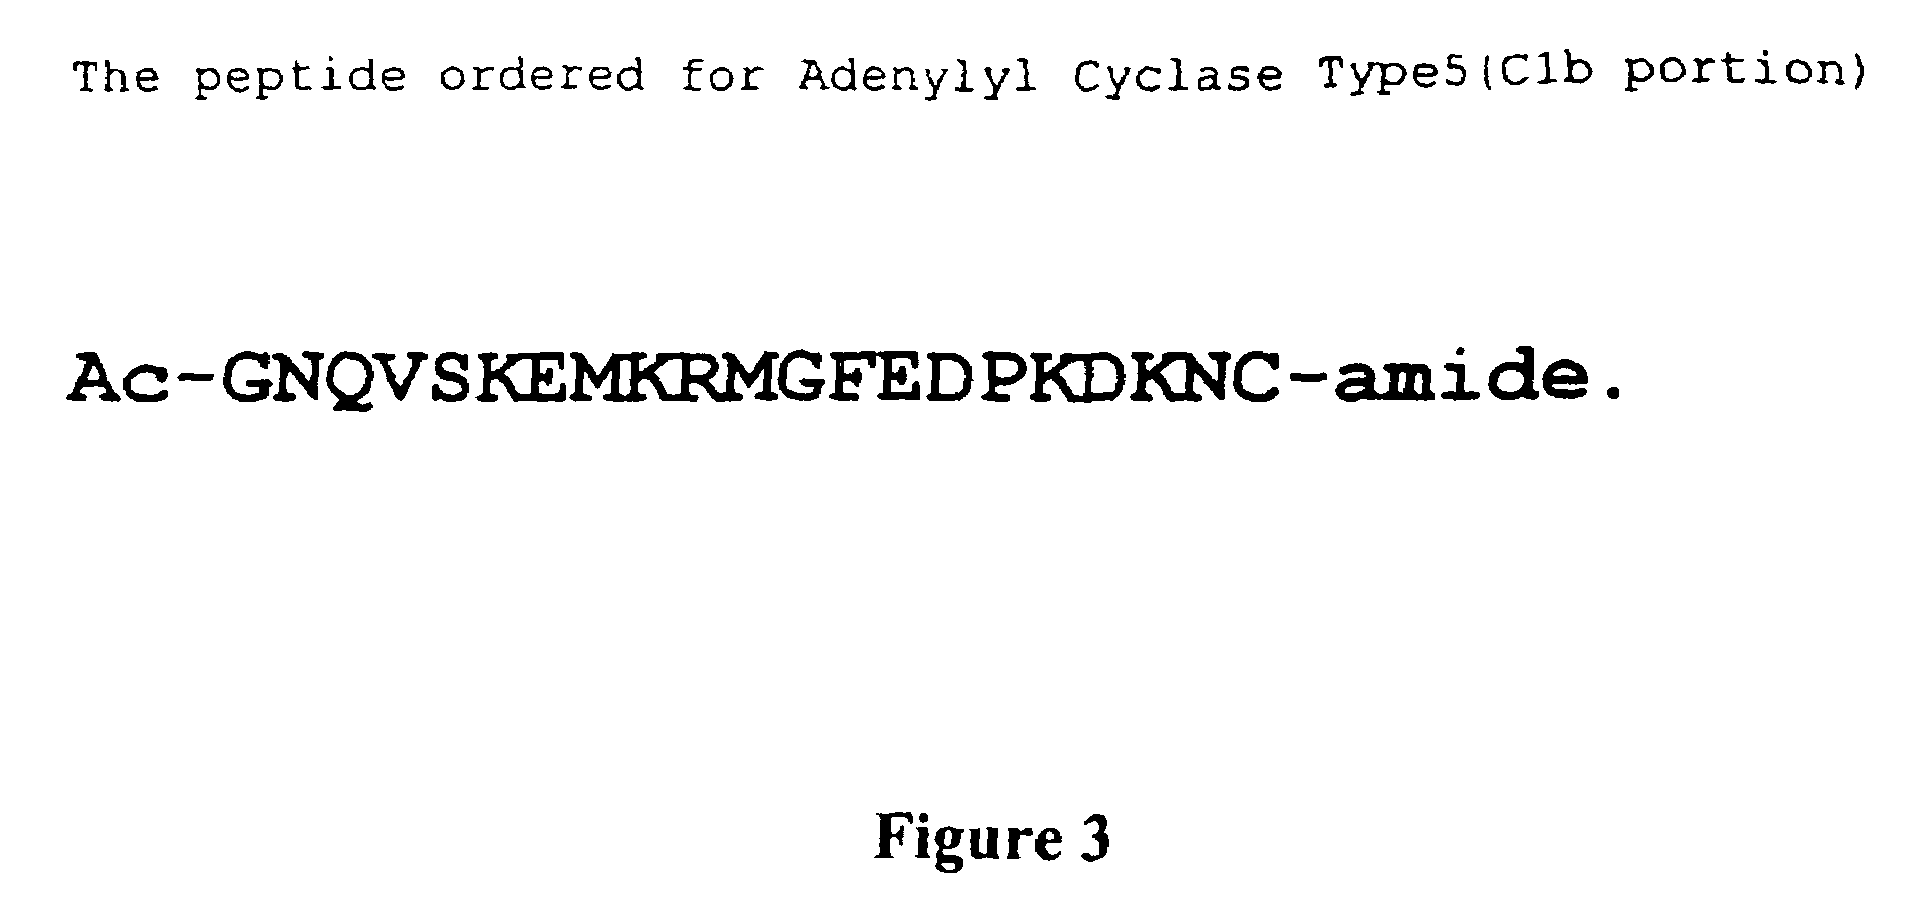 Adenylyl cyclase antibodies, compositions and uses thereof